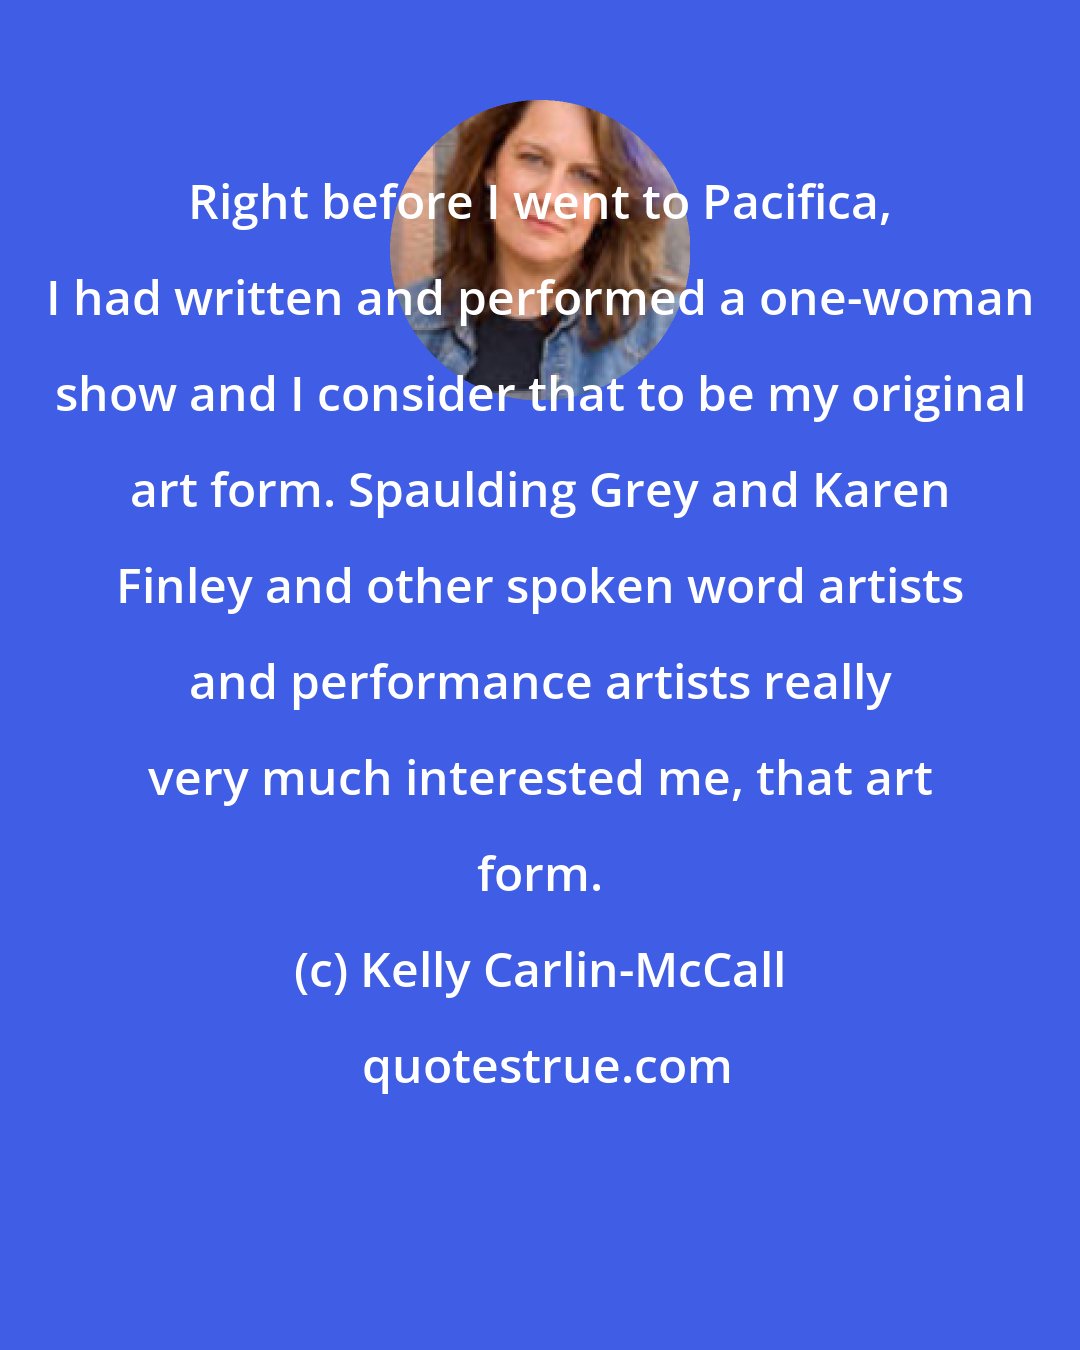 Kelly Carlin-McCall: Right before I went to Pacifica, I had written and performed a one-woman show and I consider that to be my original art form. Spaulding Grey and Karen Finley and other spoken word artists and performance artists really very much interested me, that art form.